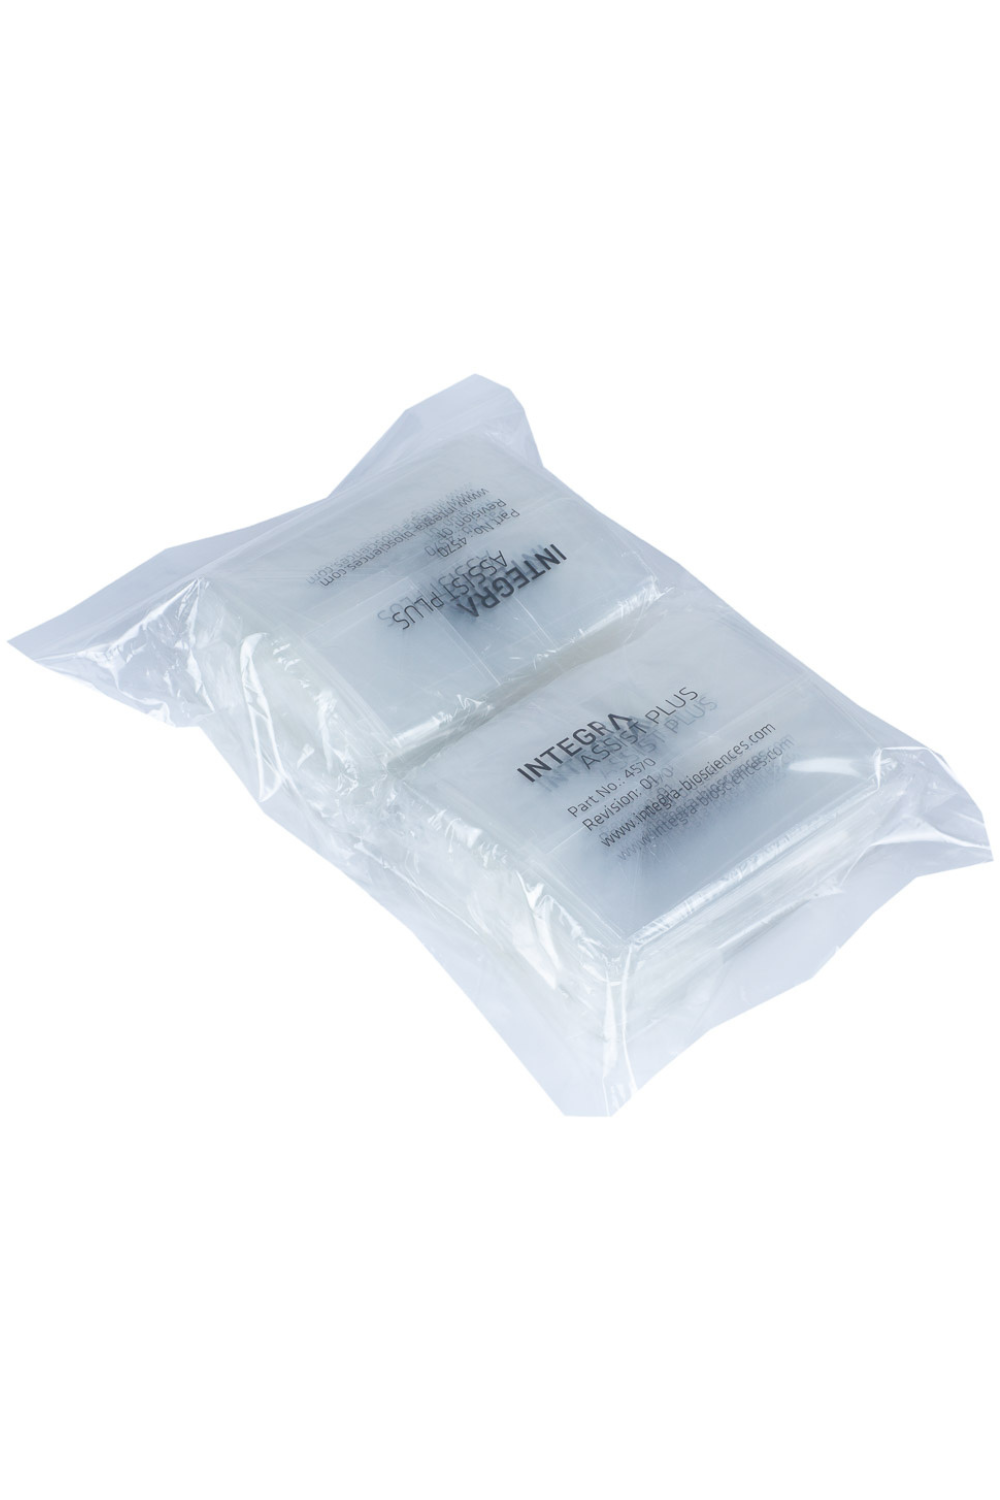 Integra - Waste Bags for Assist Plus - Overpack of 5 packs of 200 bags (4570)